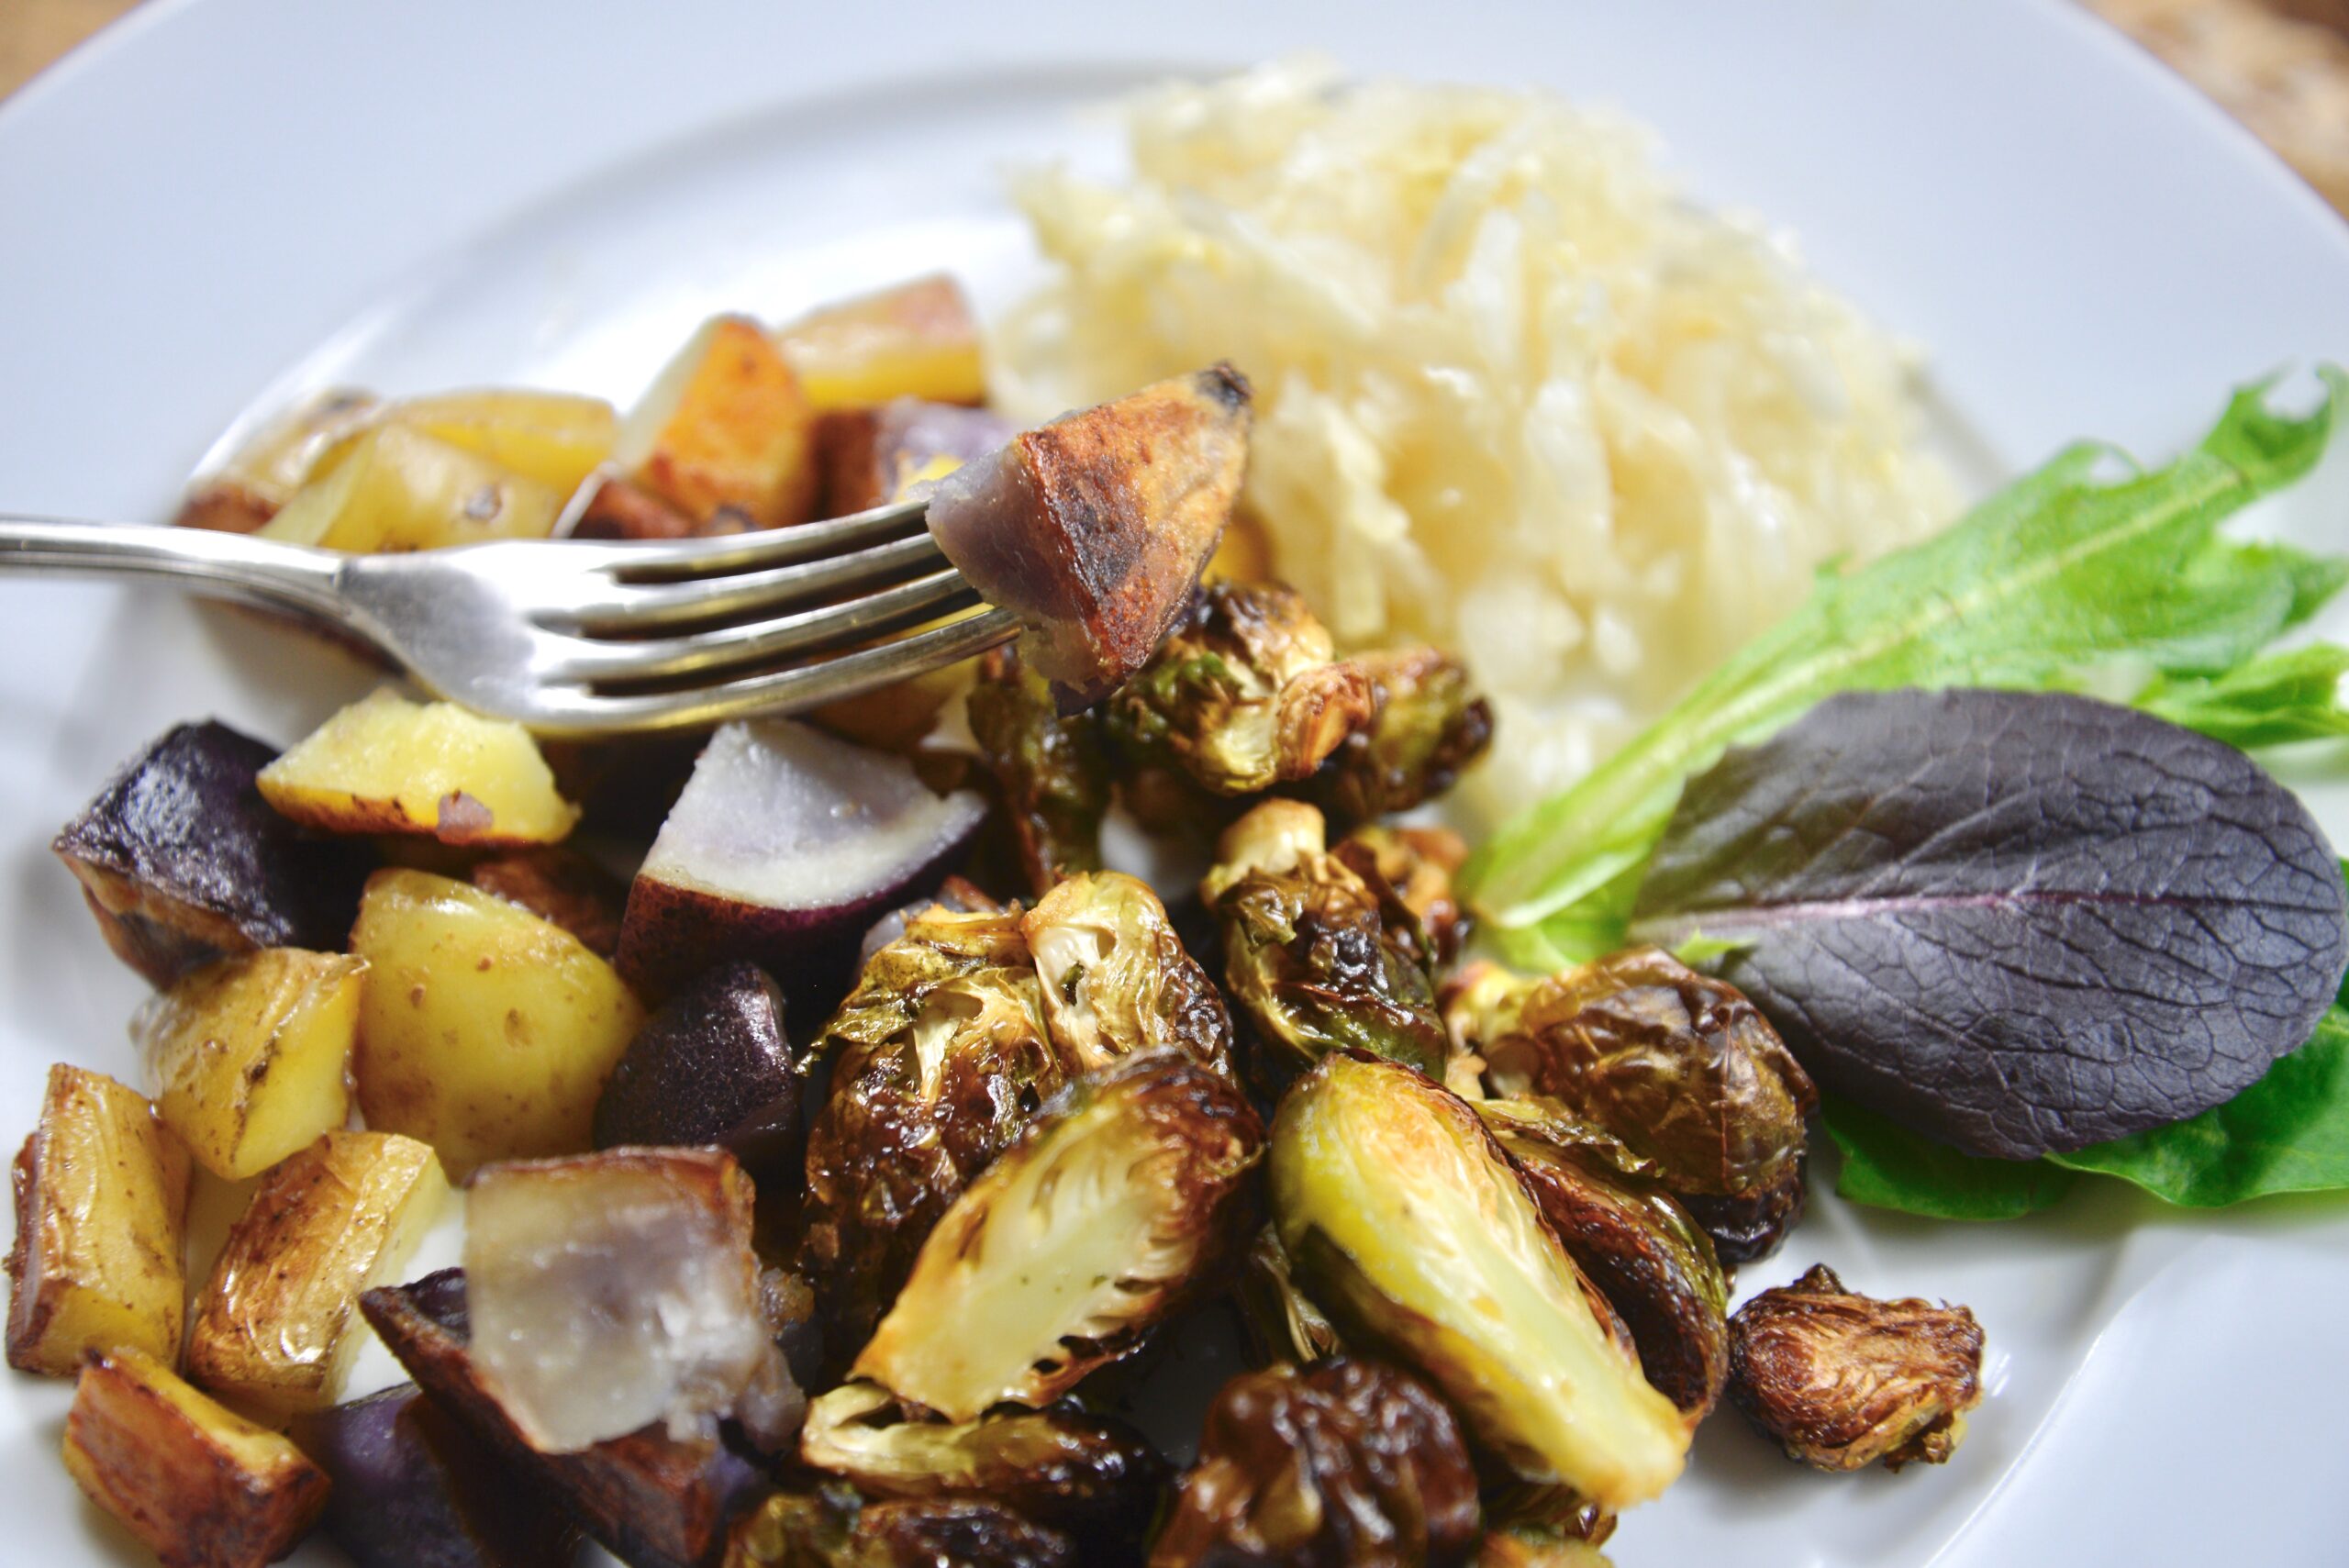 Camel Hump Fat Roasted Potatoes & Brussel Sprouts